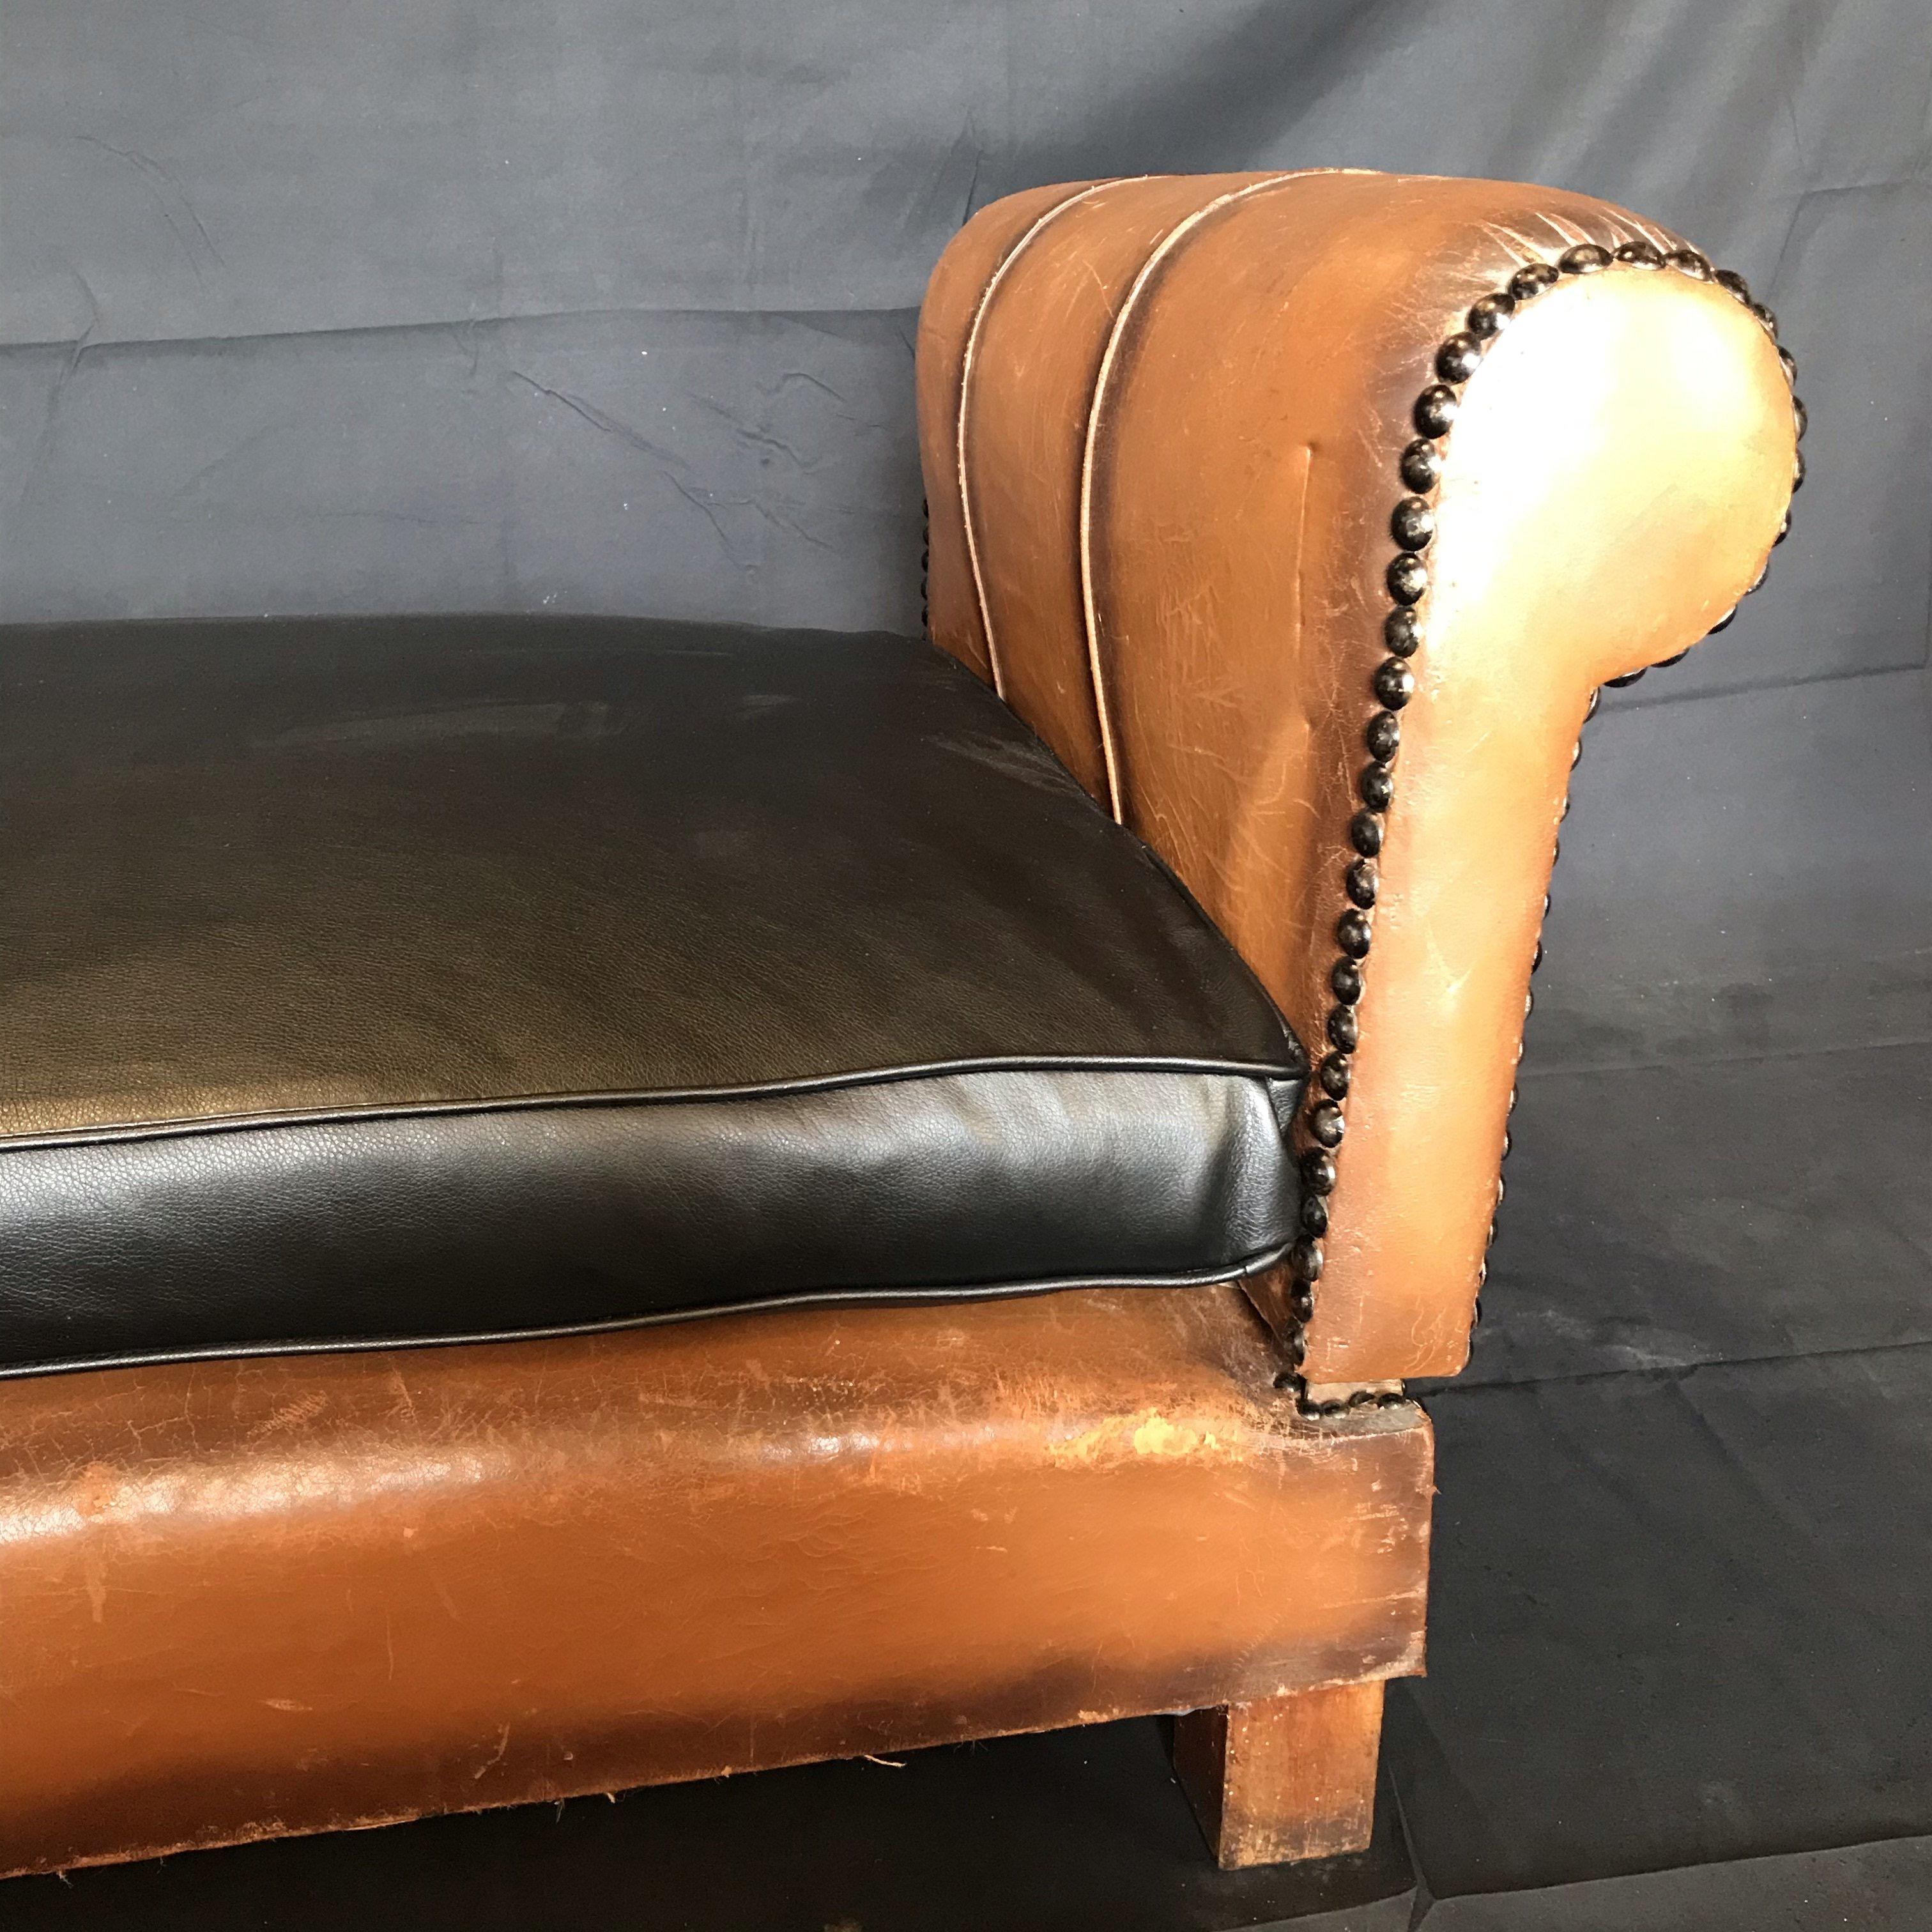 This versatile French deco daybed circa late 1930s can be converted from a bench to daybed, when the arms are removed and reoriented into the appropriate frame fittings. The dark seams complement both the newly reupholstered black faux leather